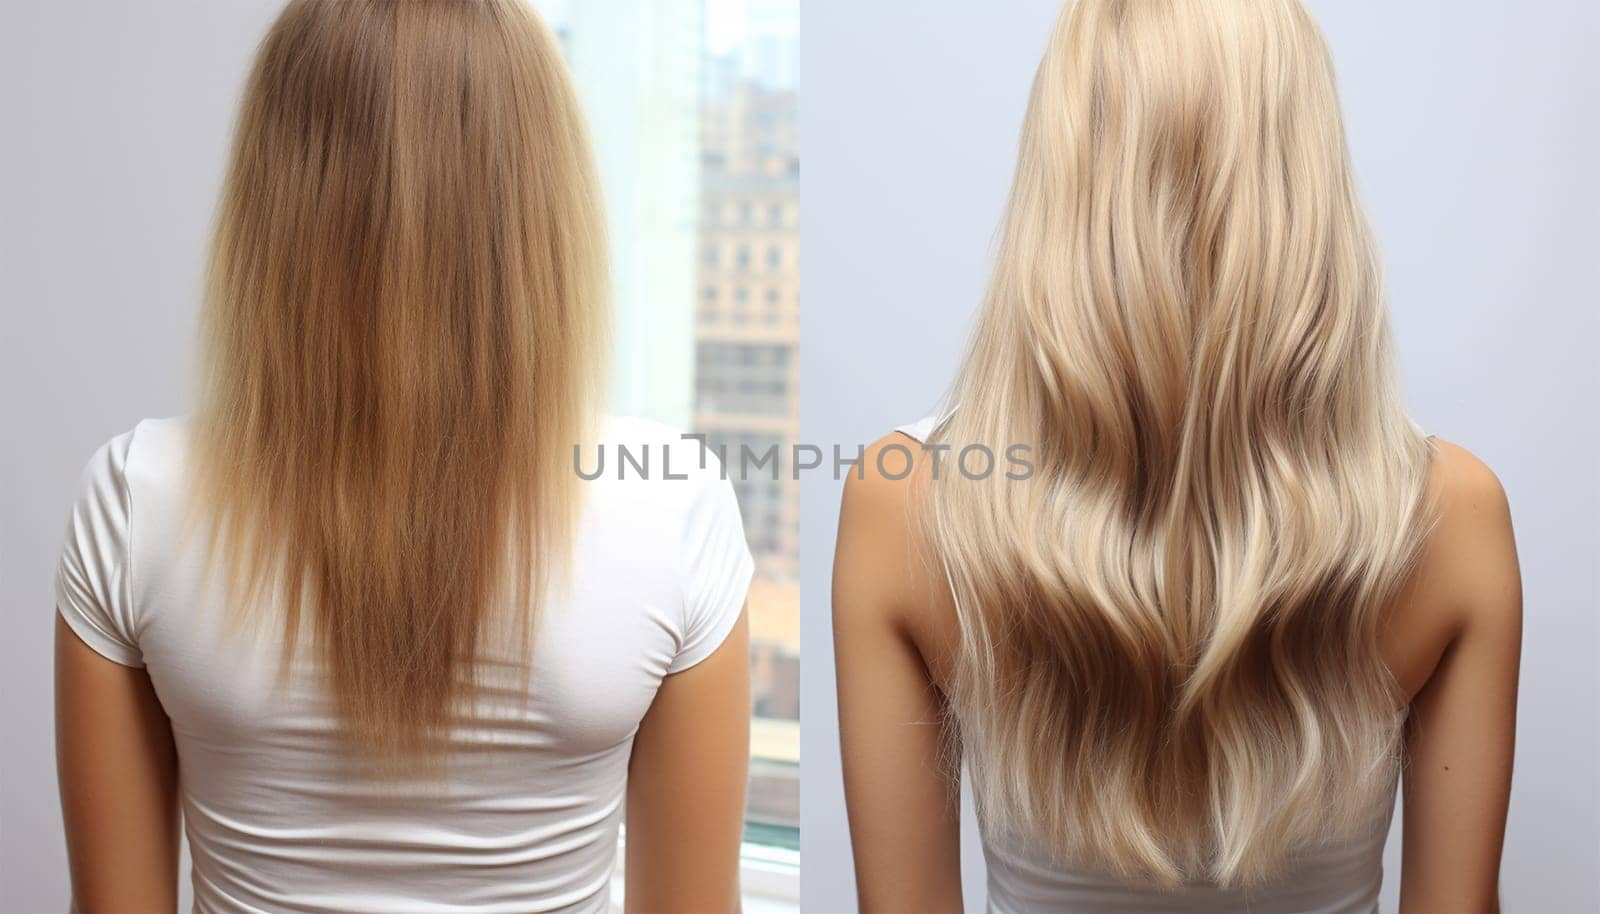 Woman before and after hair extensions on white background. Hair extension, beauty, tress, hair growth, styling, salon concept. Length and volume. Beauty hair treatment concept hair salon